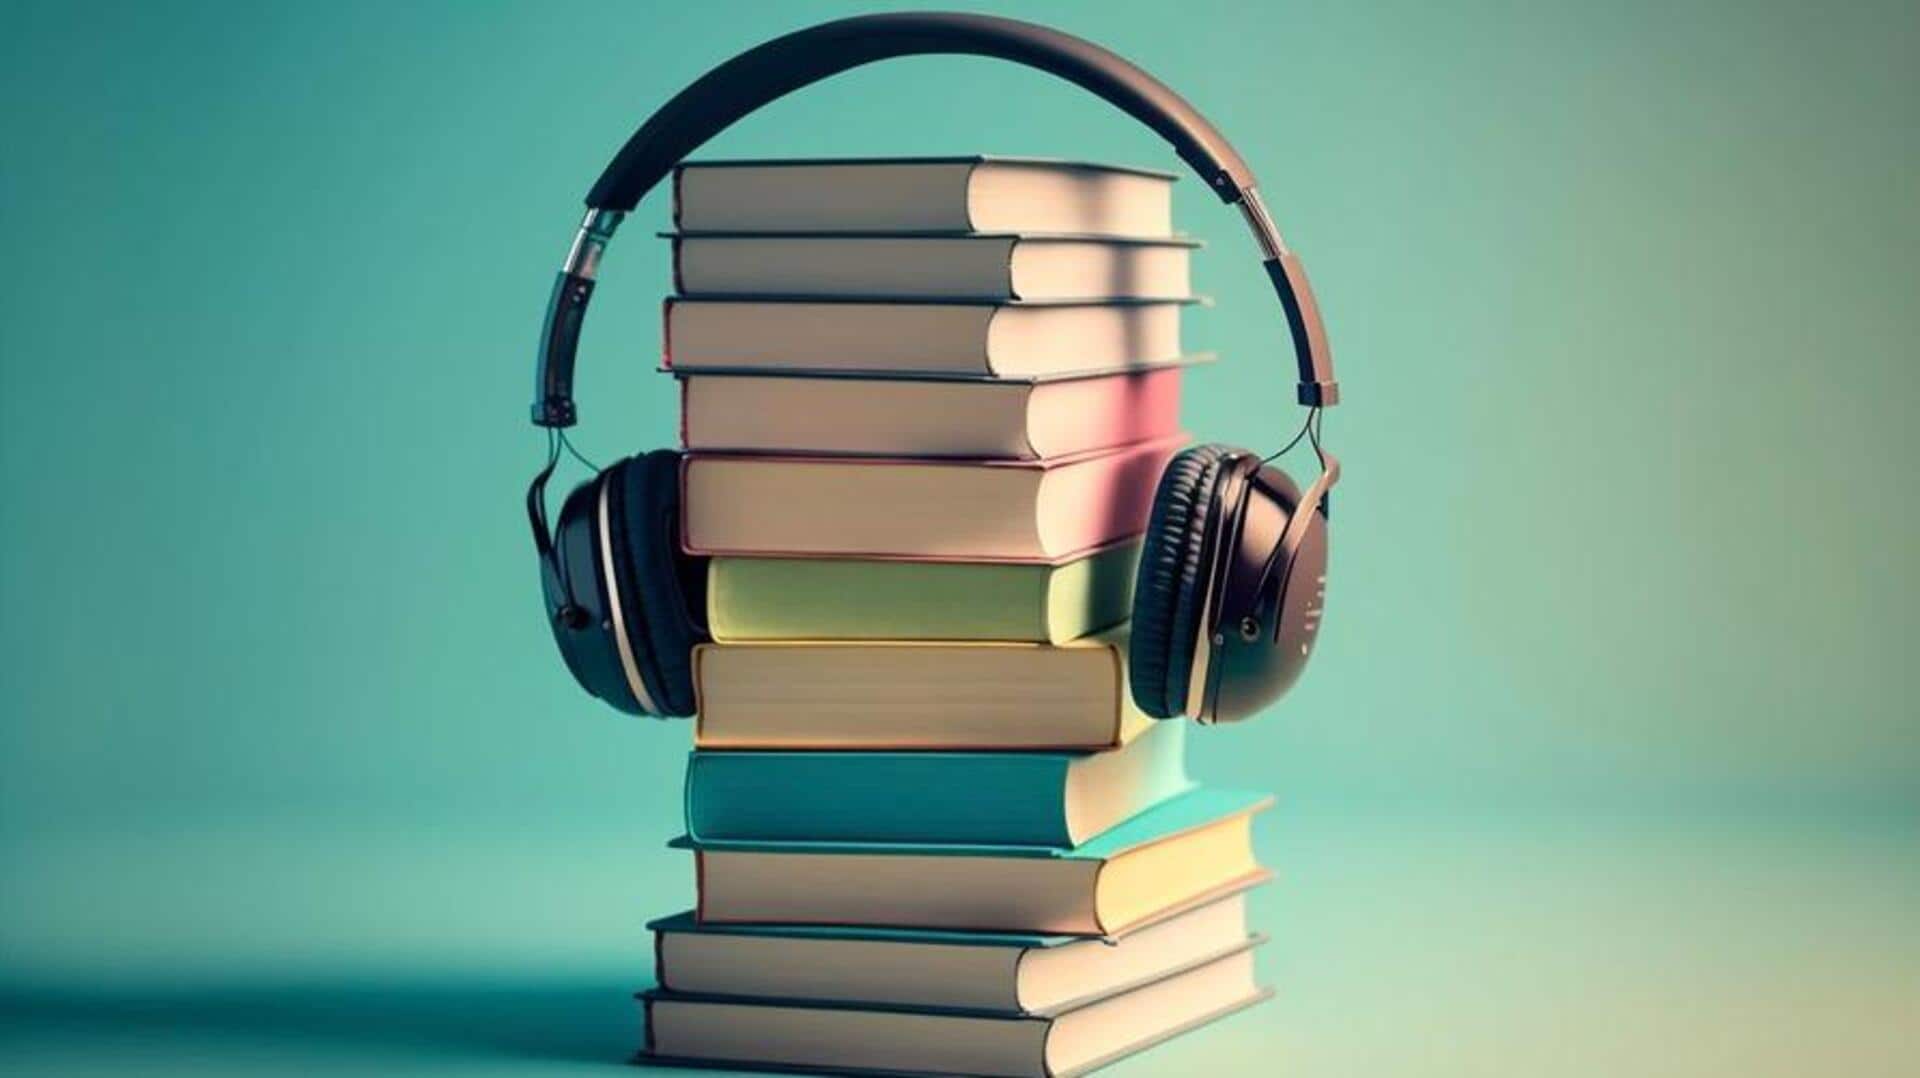 Love audiobooks? Here's how you can enhance your experience